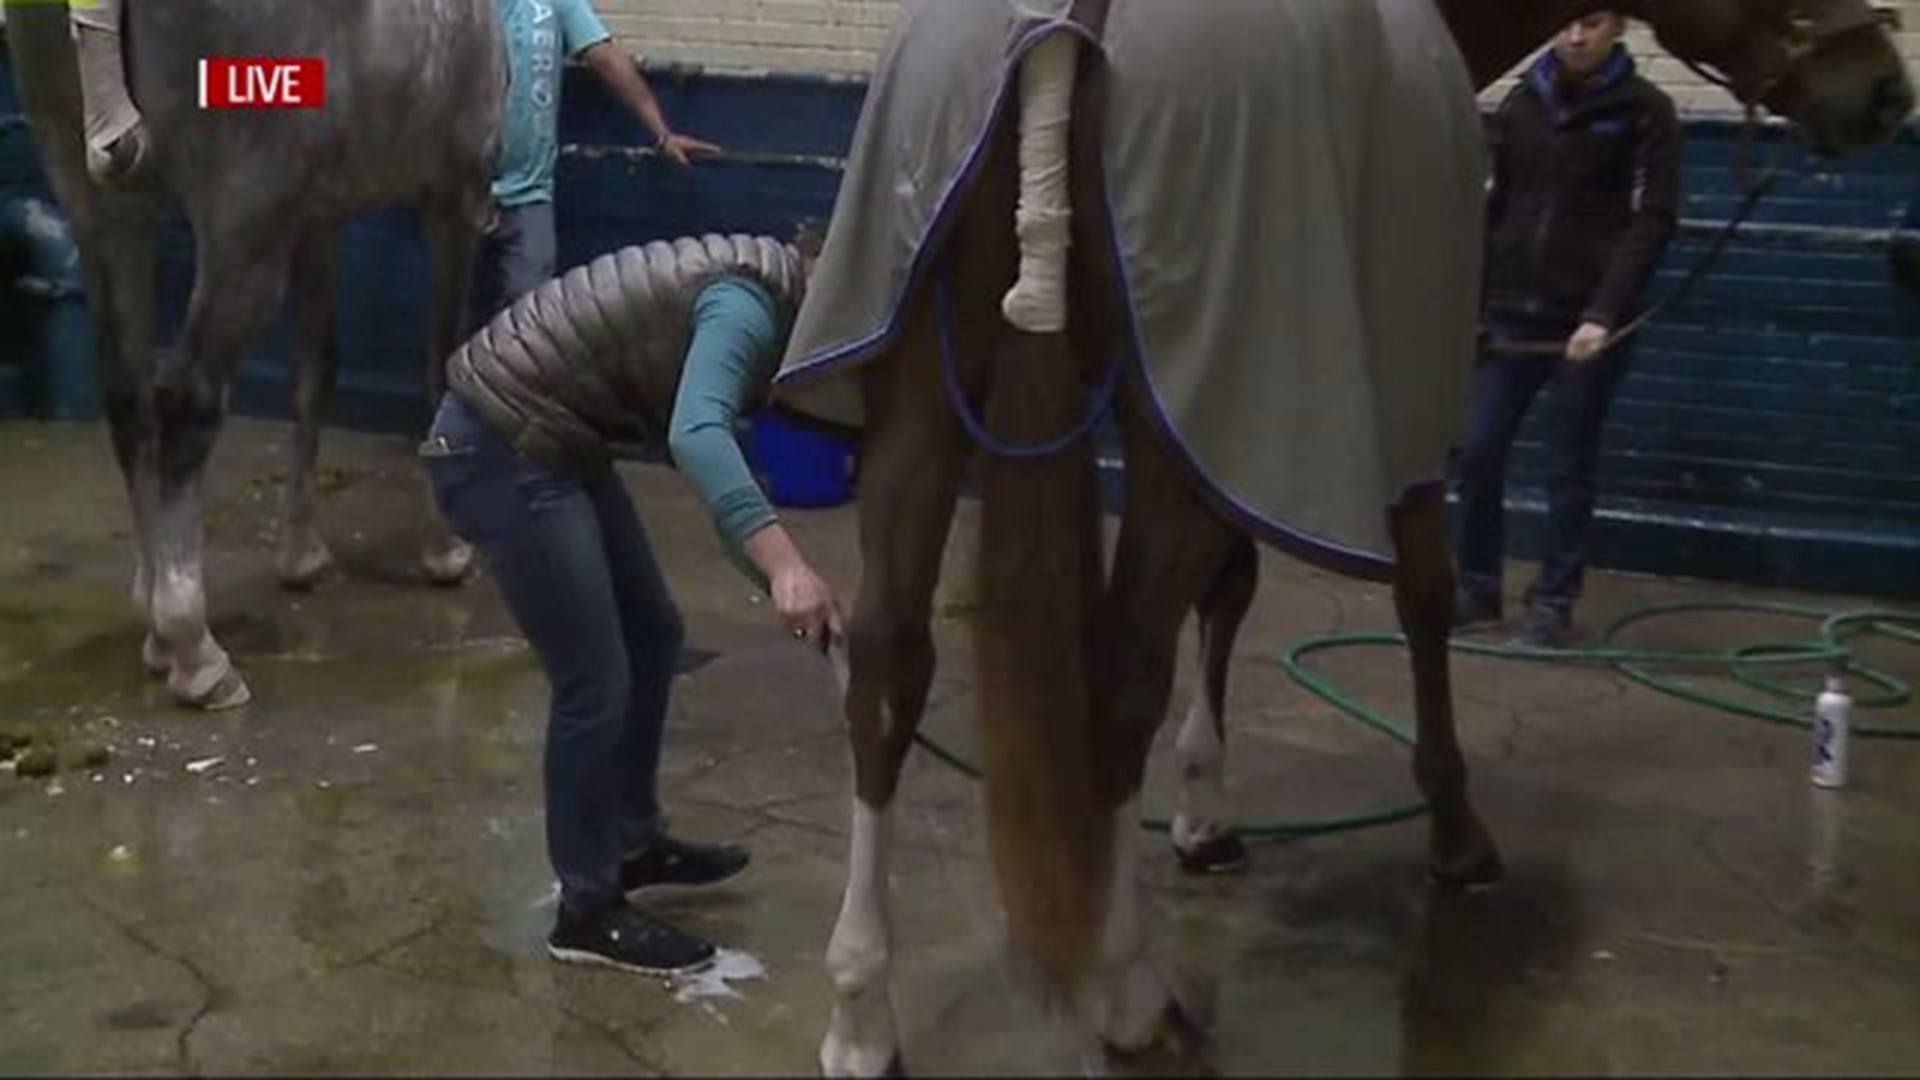 Behind the scenes at the Pennsylvania National Horse Show at the Farm Show Complex in Harrisburg